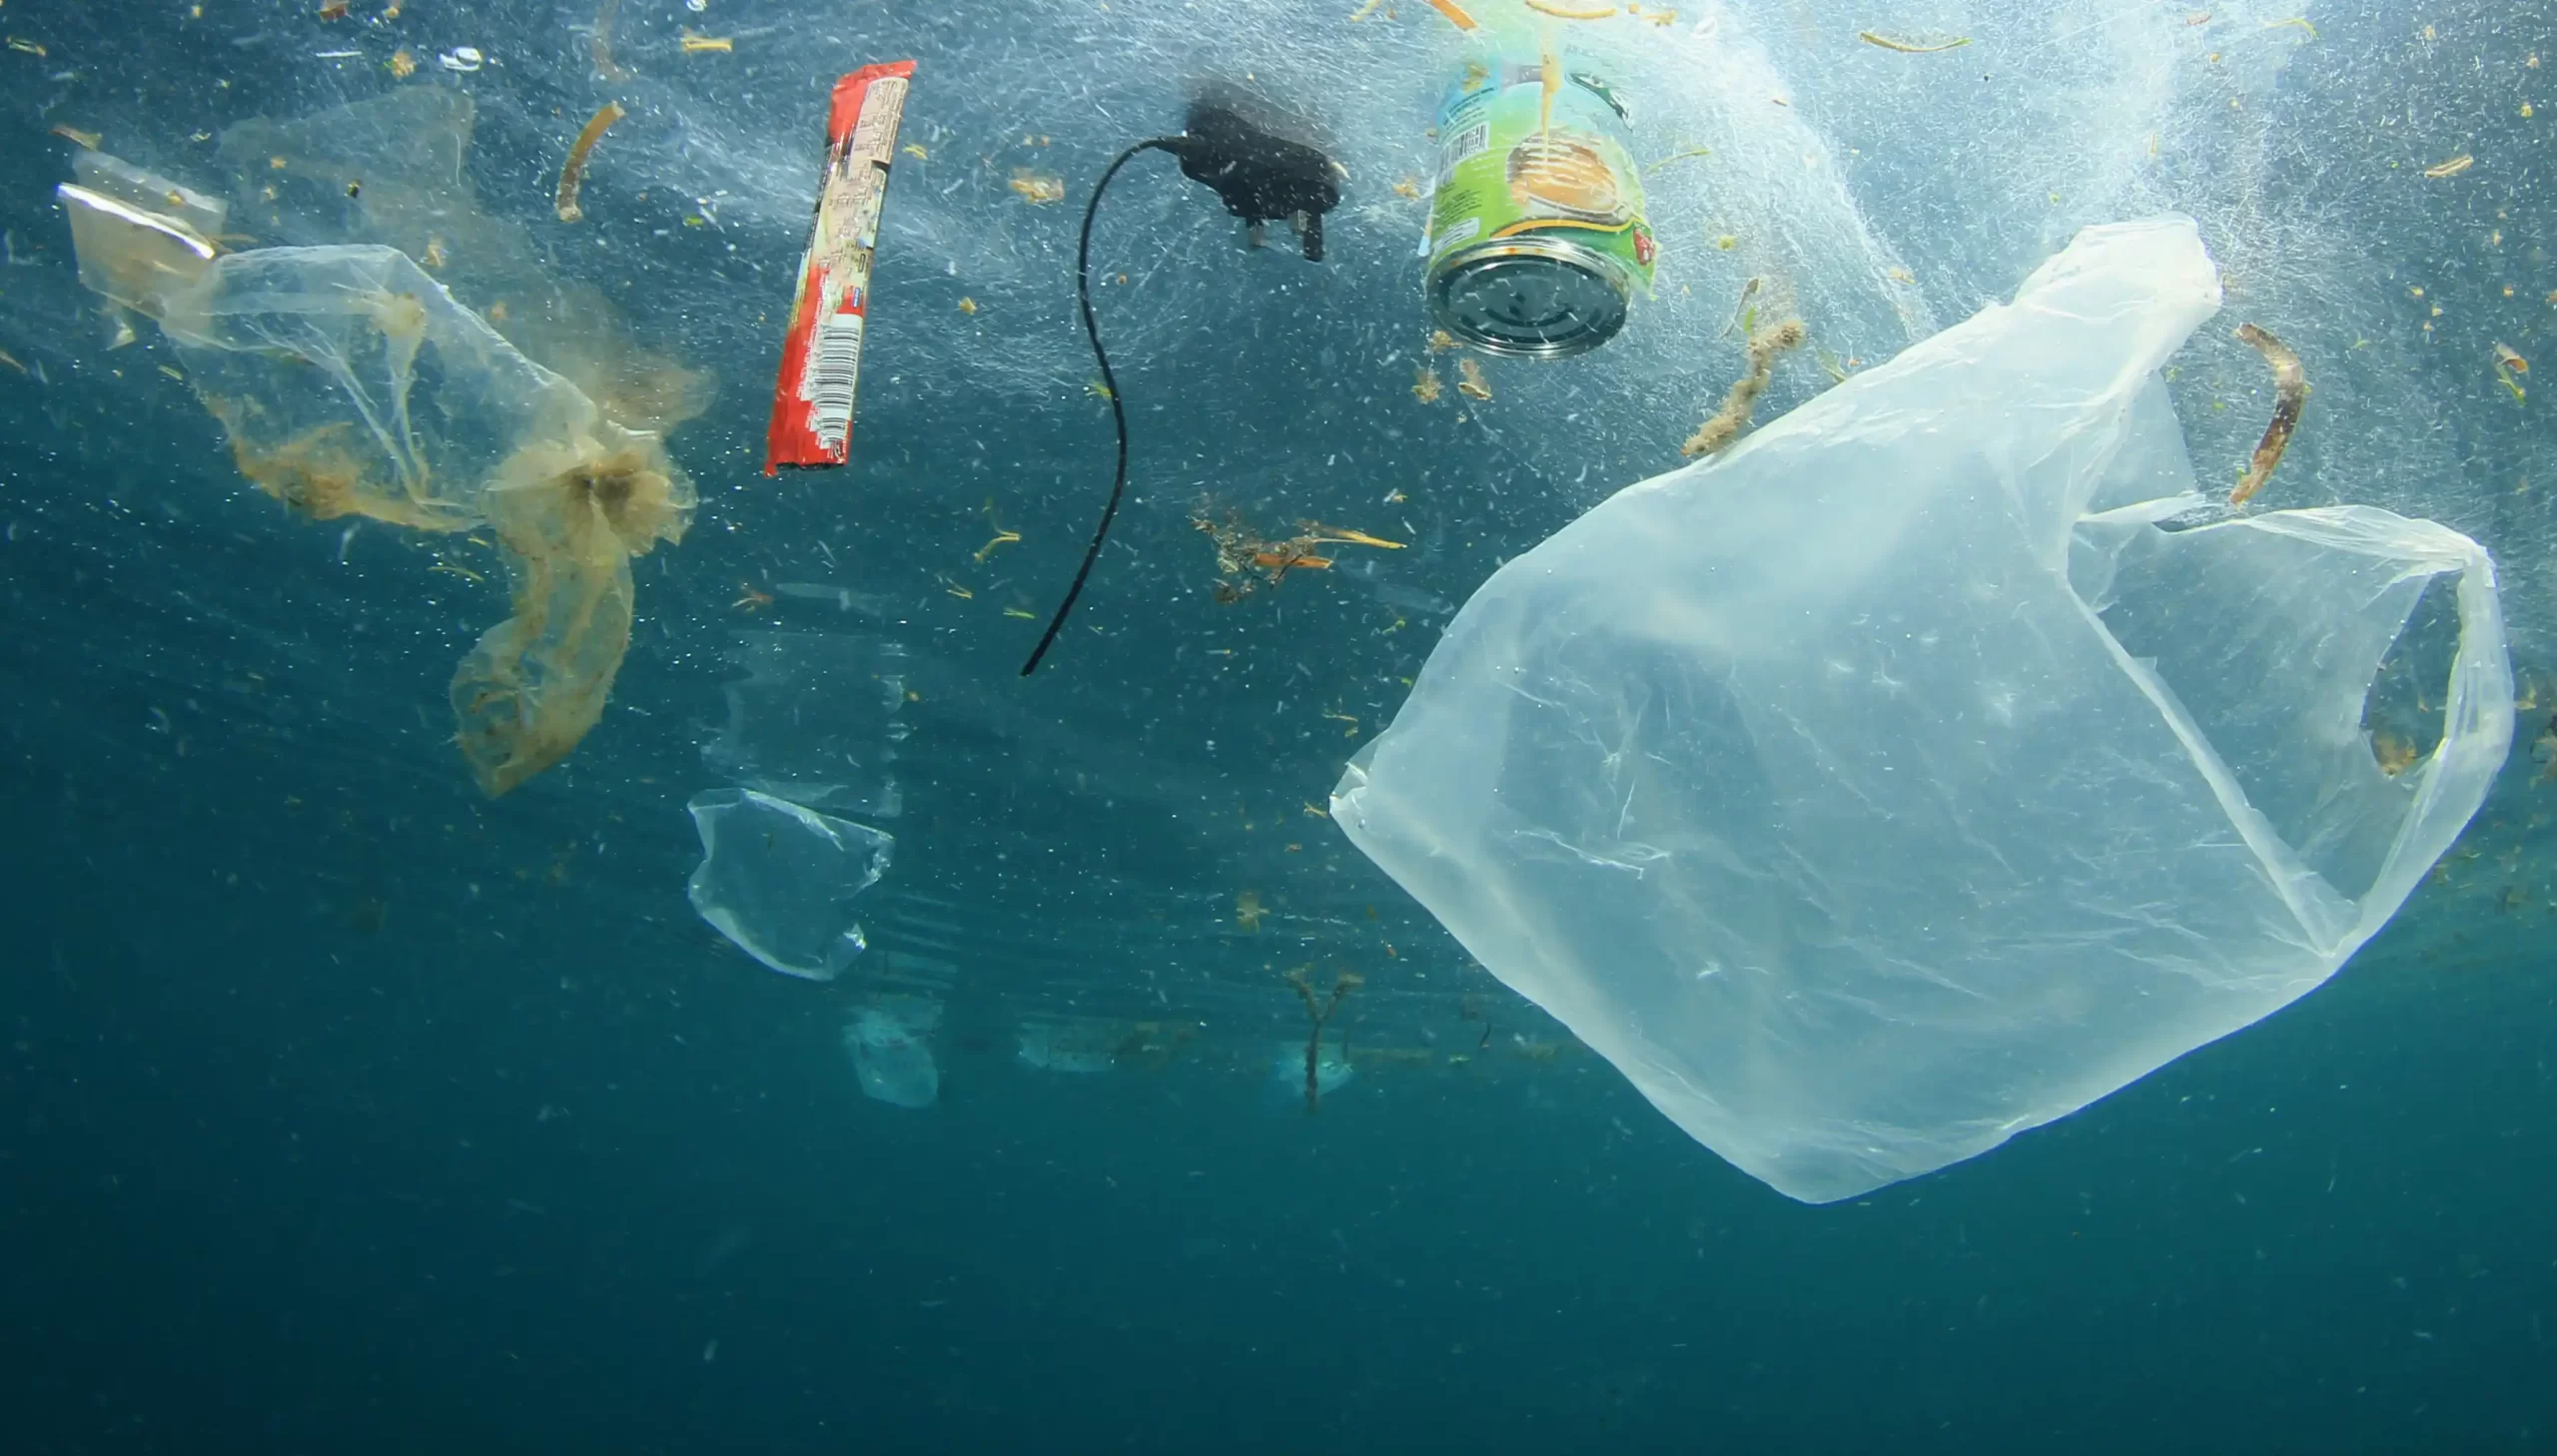 Plastic bags, cans, and packaging pollution in the sea.